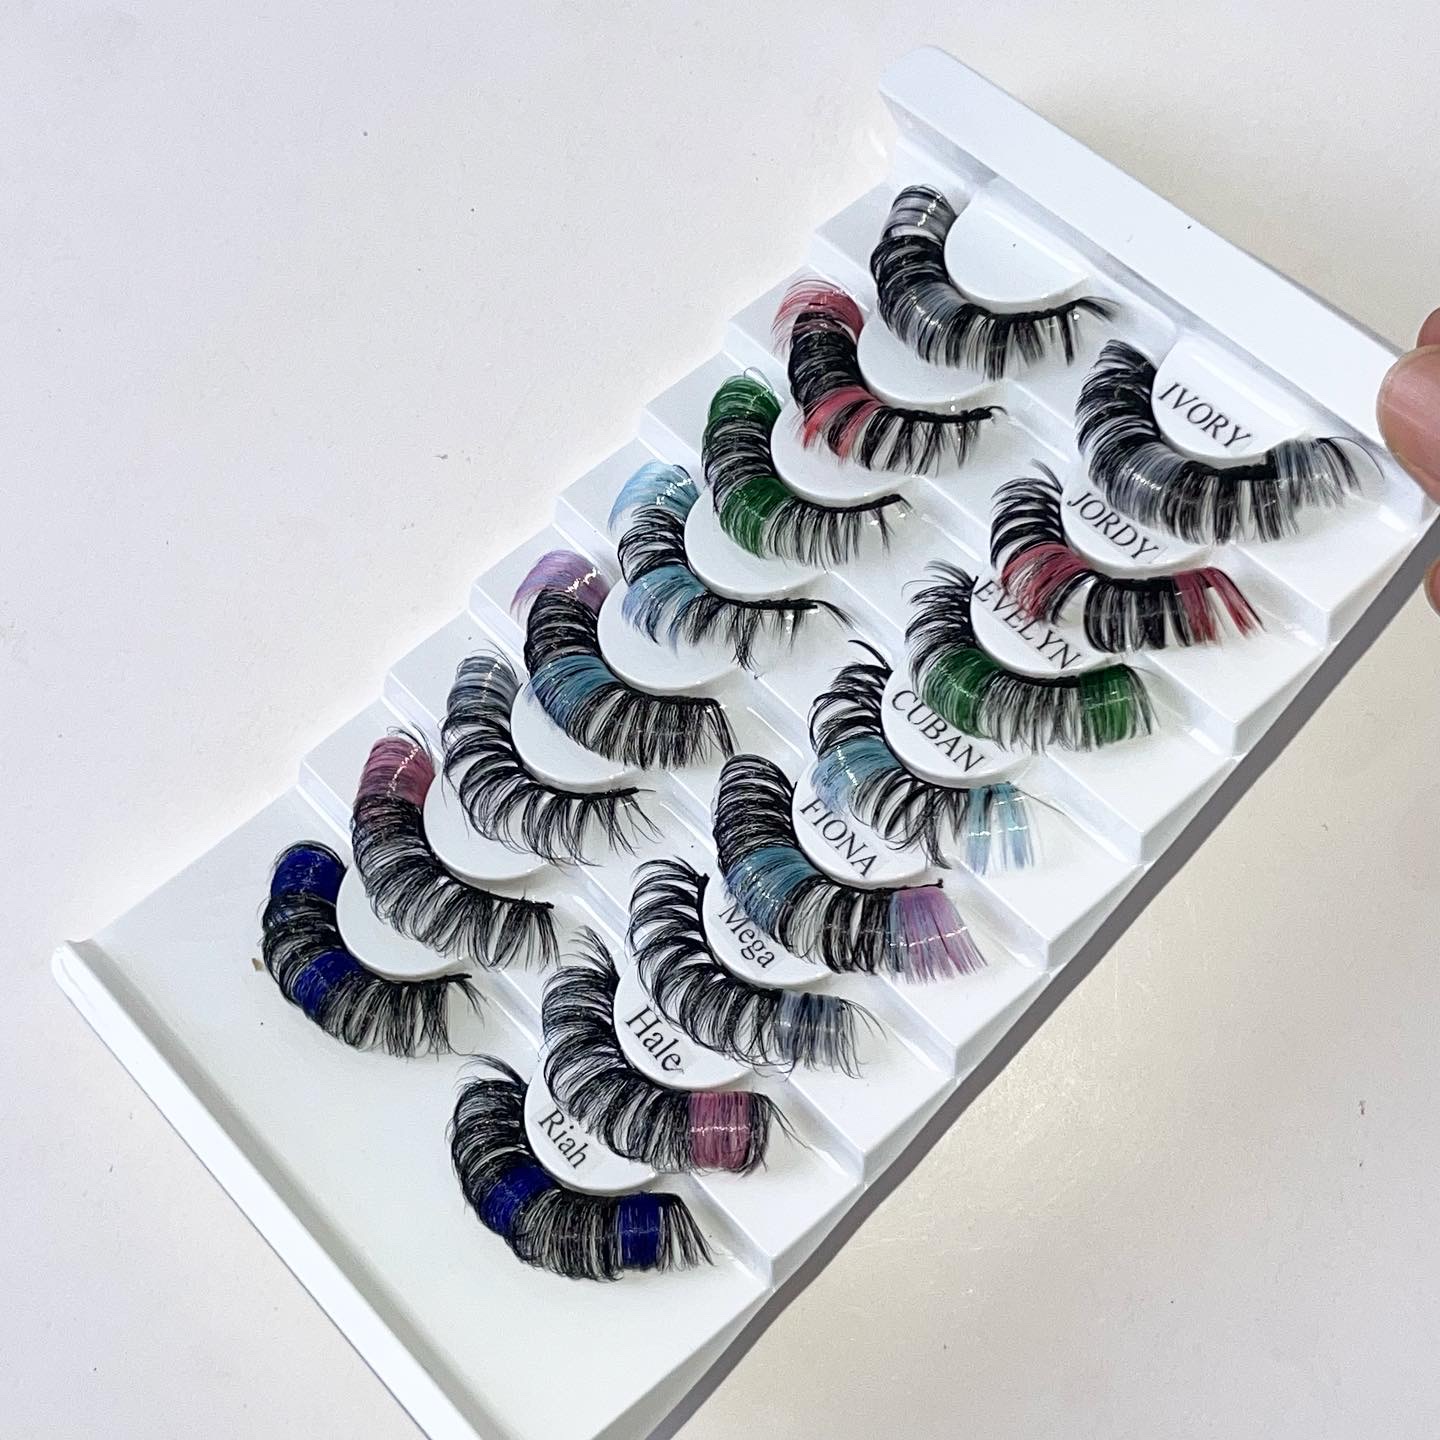 8 PACK 15MM TWO TONE RUSSIAN LASHES